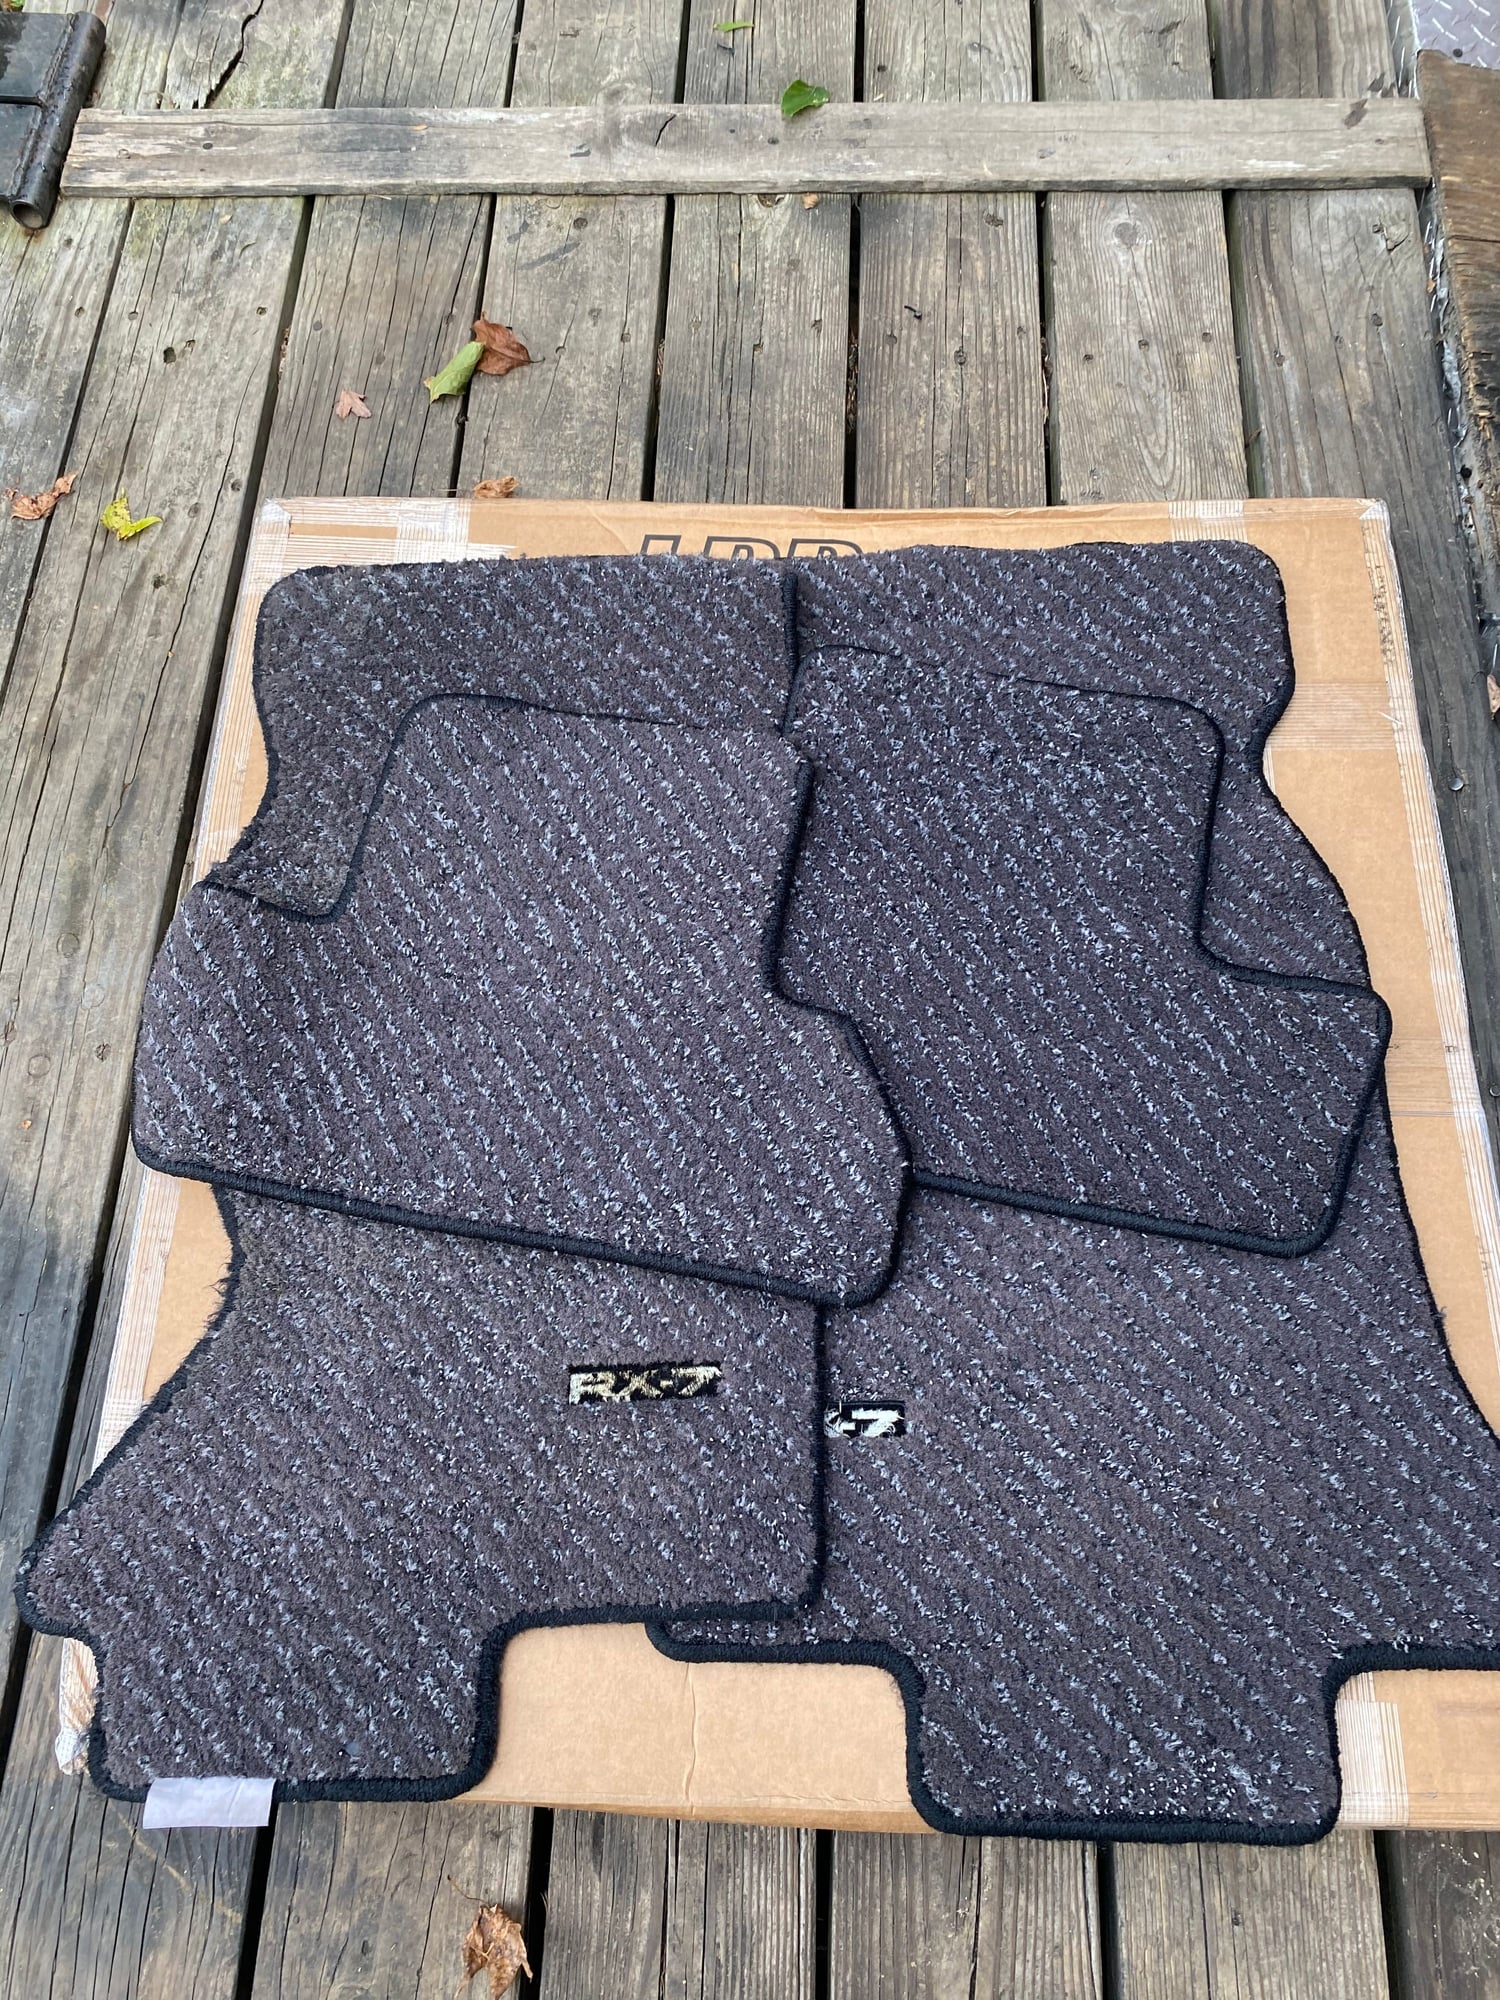 Interior/Upholstery - JDM FD RX-7 Floor Mats Great Shape!!! - Used - 1992 to 2002 Mazda RX-7 - Prince Frederick, MD 20678, United States